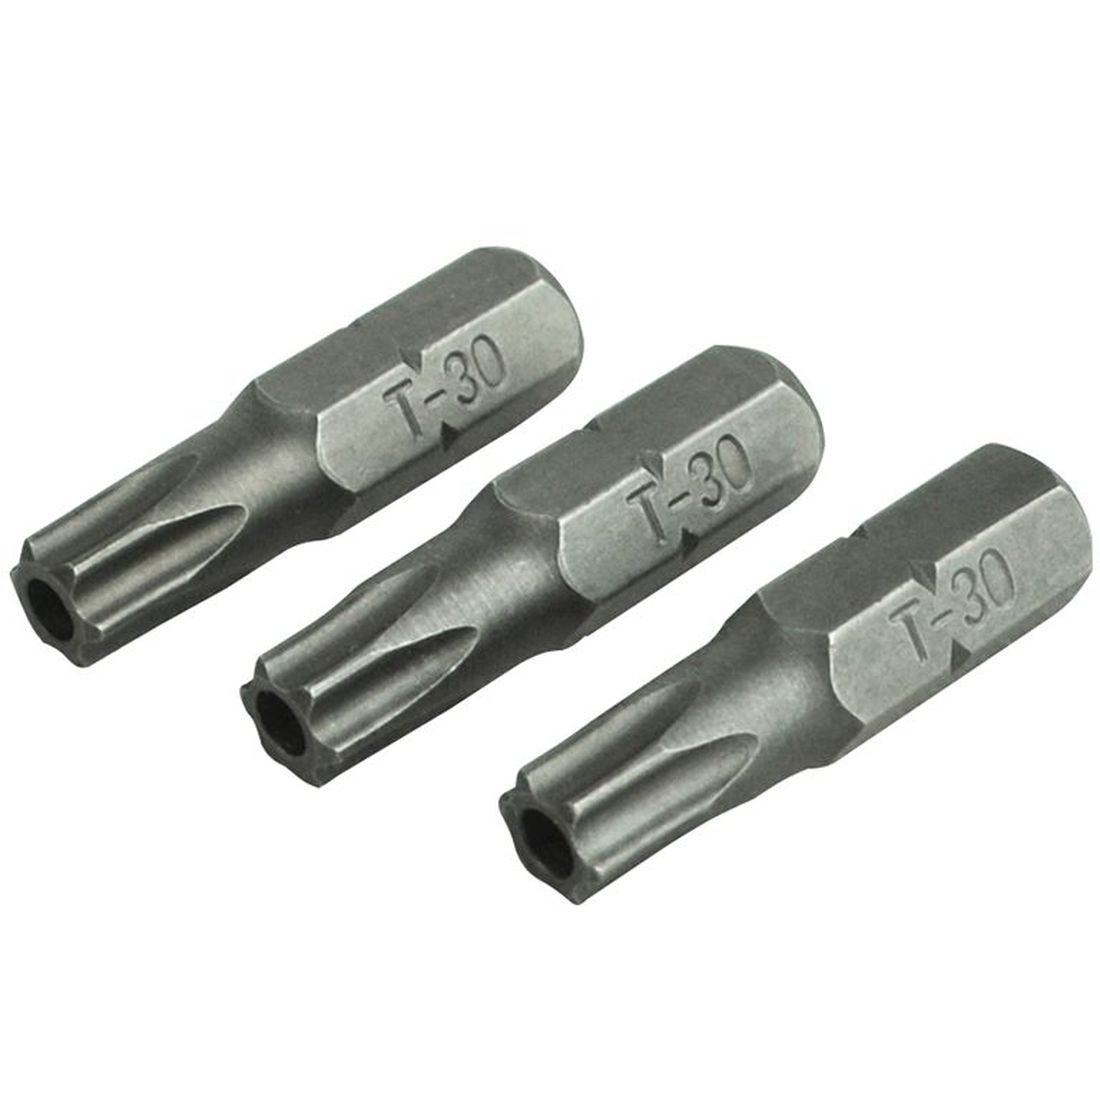 Faithfull Security S2 Grade Steel Screwdriver Bits T30S x 25mm (Pack 3)                   